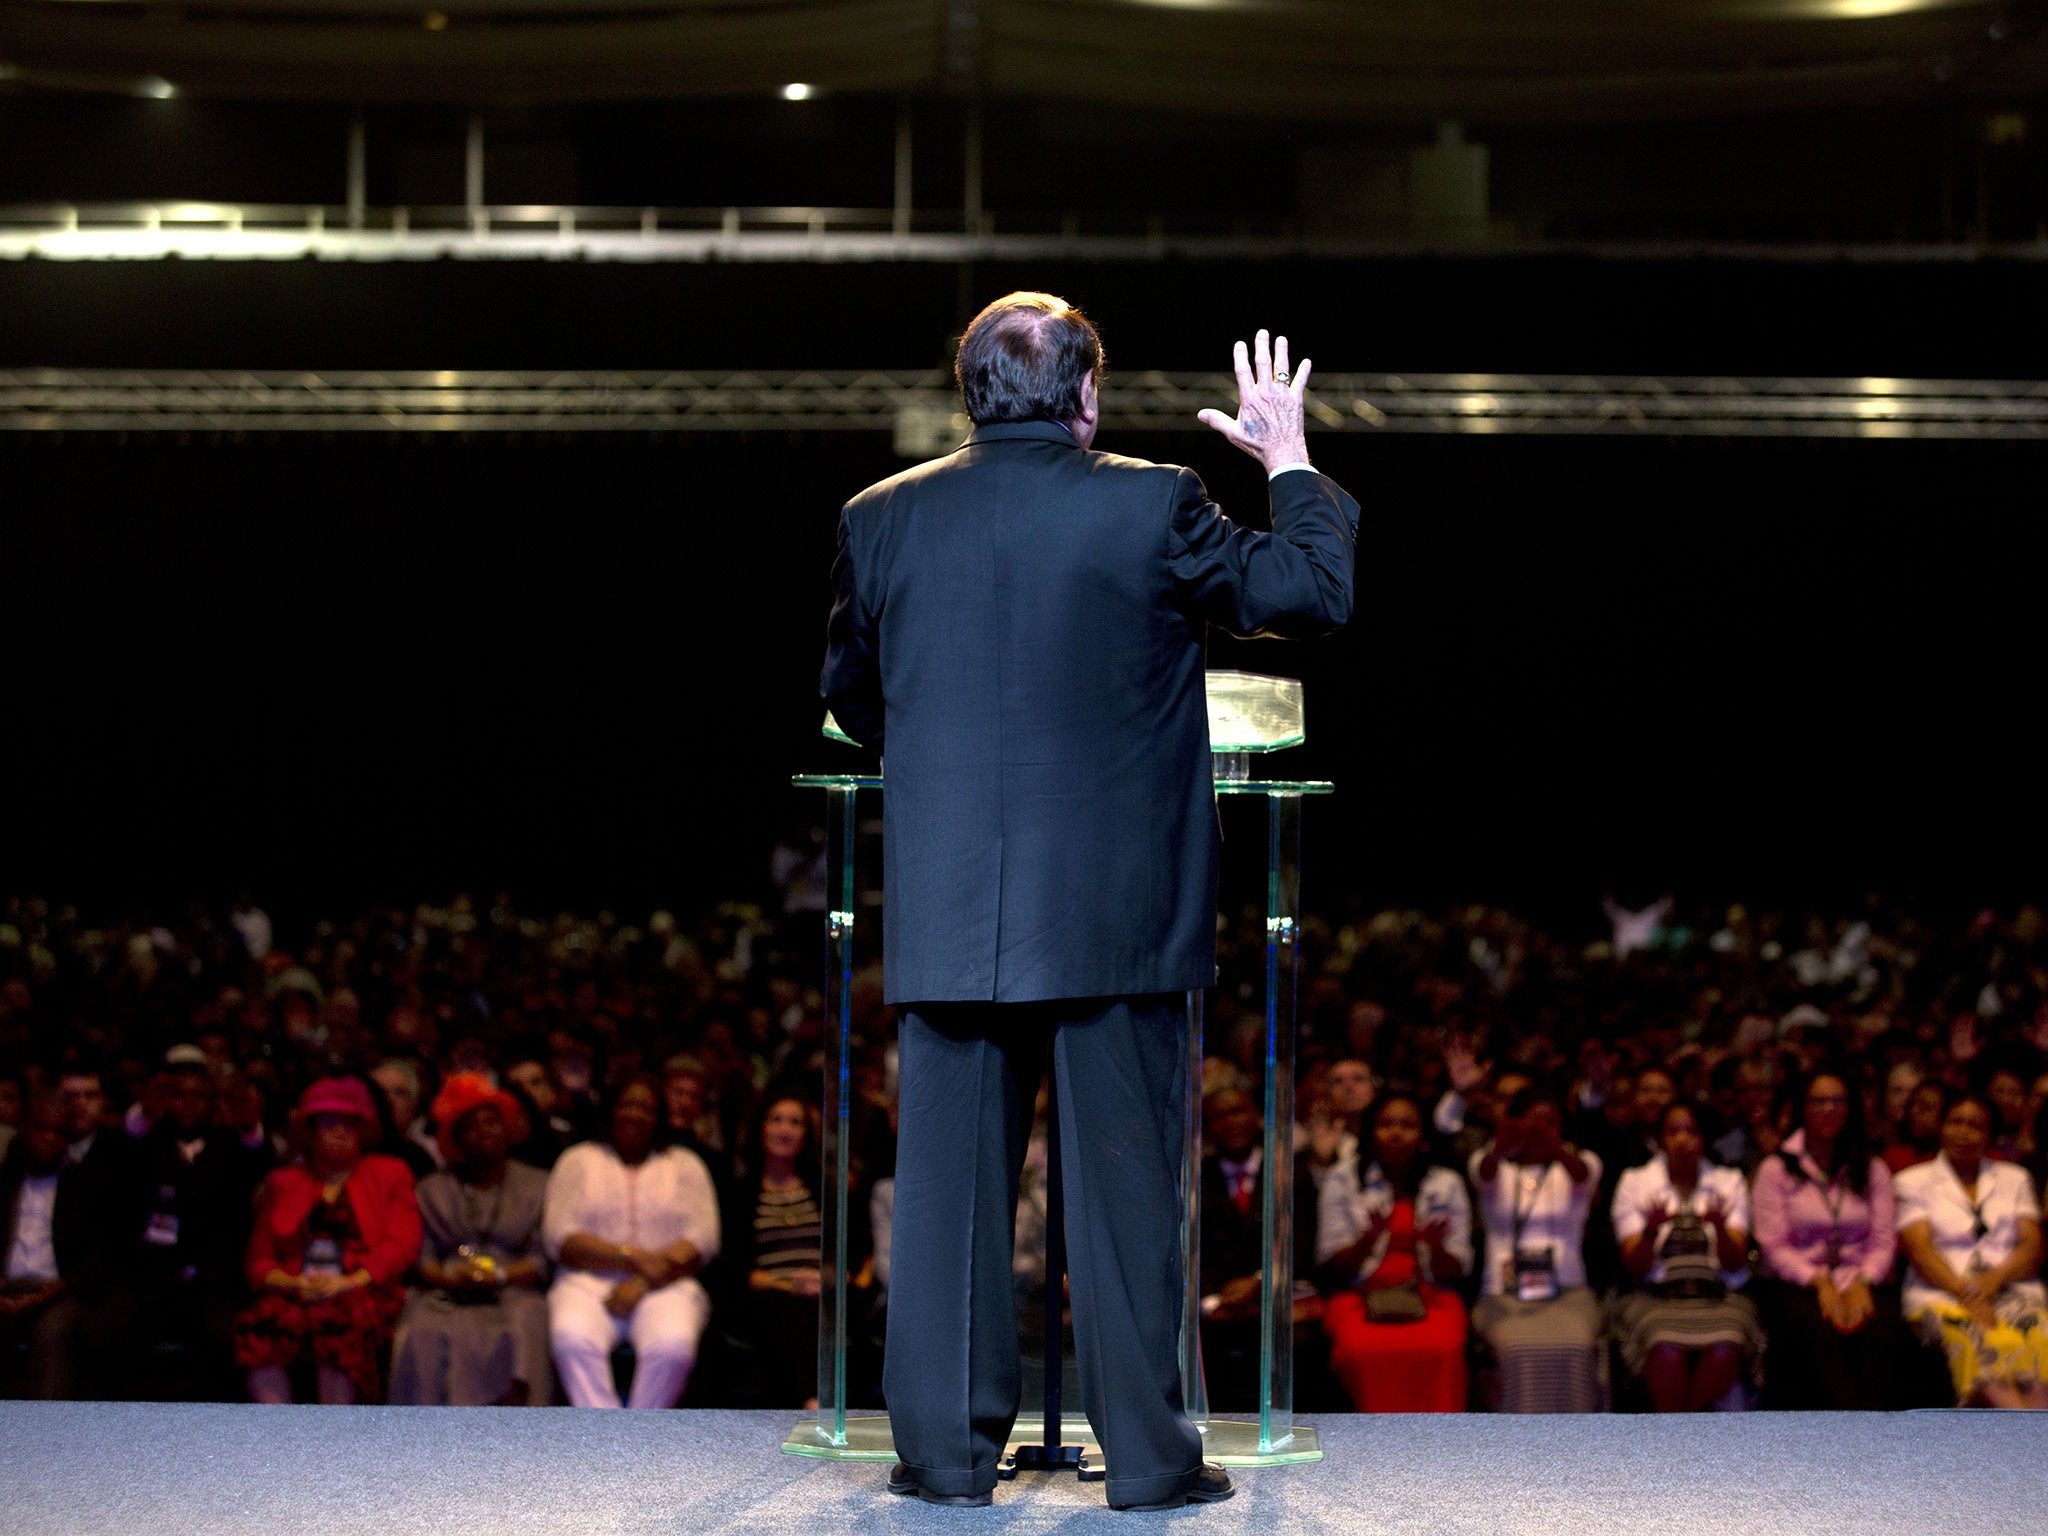 Televangelist Morris Cerullo is appearing at Earls Court